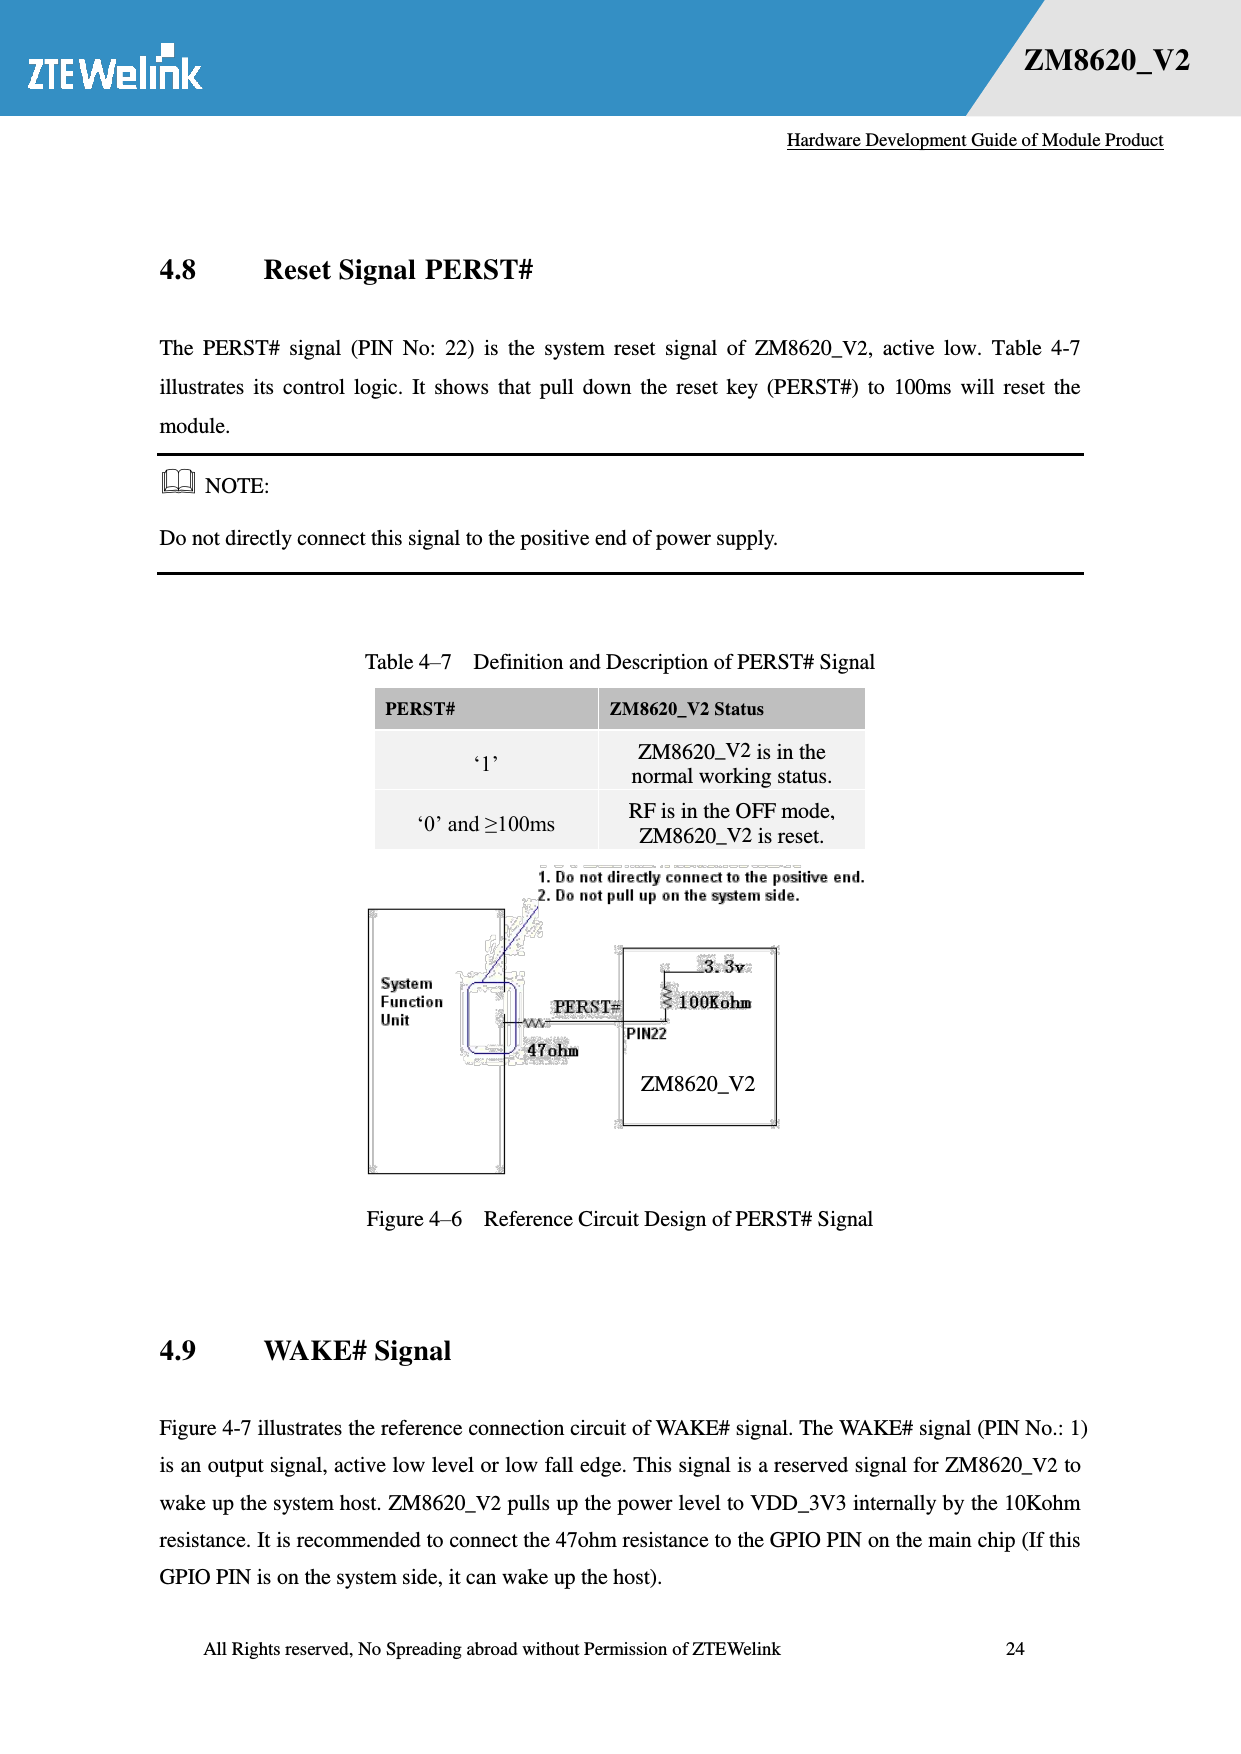   Hardware Development Guide of Module Product  All Rights reserved, No Spreading abroad without Permission of ZTEWelink              24 错误！未找到用源。    ZM8620_V2  4.8 Reset Signal PERST# The  PERST#  signal  (PIN  No:  22)  is  the  system  reset  signal  of  ZM8620_V2,  active  low.  Table  4-7 illustrates  its  control  logic.  It  shows  that  pull  down  the  reset  key  (PERST#)  to  100ms  will  reset  the module.  NOTE: Do not directly connect this signal to the positive end of power supply.  Table 4–7  Definition and Description of PERST# Signal PERST#   ZM8620_V2 Status ‗1‘ ZM8620_V2 is in the normal working status.   ‗0‘ and ≥100ms RF is in the OFF mode, ZM8620_V2 is reset.    Figure 4–6  Reference Circuit Design of PERST# Signal  4.9 WAKE# Signal Figure 4-7 illustrates the reference connection circuit of WAKE# signal. The WAKE# signal (PIN No.: 1) is an output signal, active low level or low fall edge. This signal is a reserved signal for ZM8620_V2 to wake up the system host. ZM8620_V2 pulls up the power level to VDD_3V3 internally by the 10Kohm resistance. It is recommended to connect the 47ohm resistance to the GPIO PIN on the main chip (If this GPIO PIN is on the system side, it can wake up the host).   ZM8620_V2 